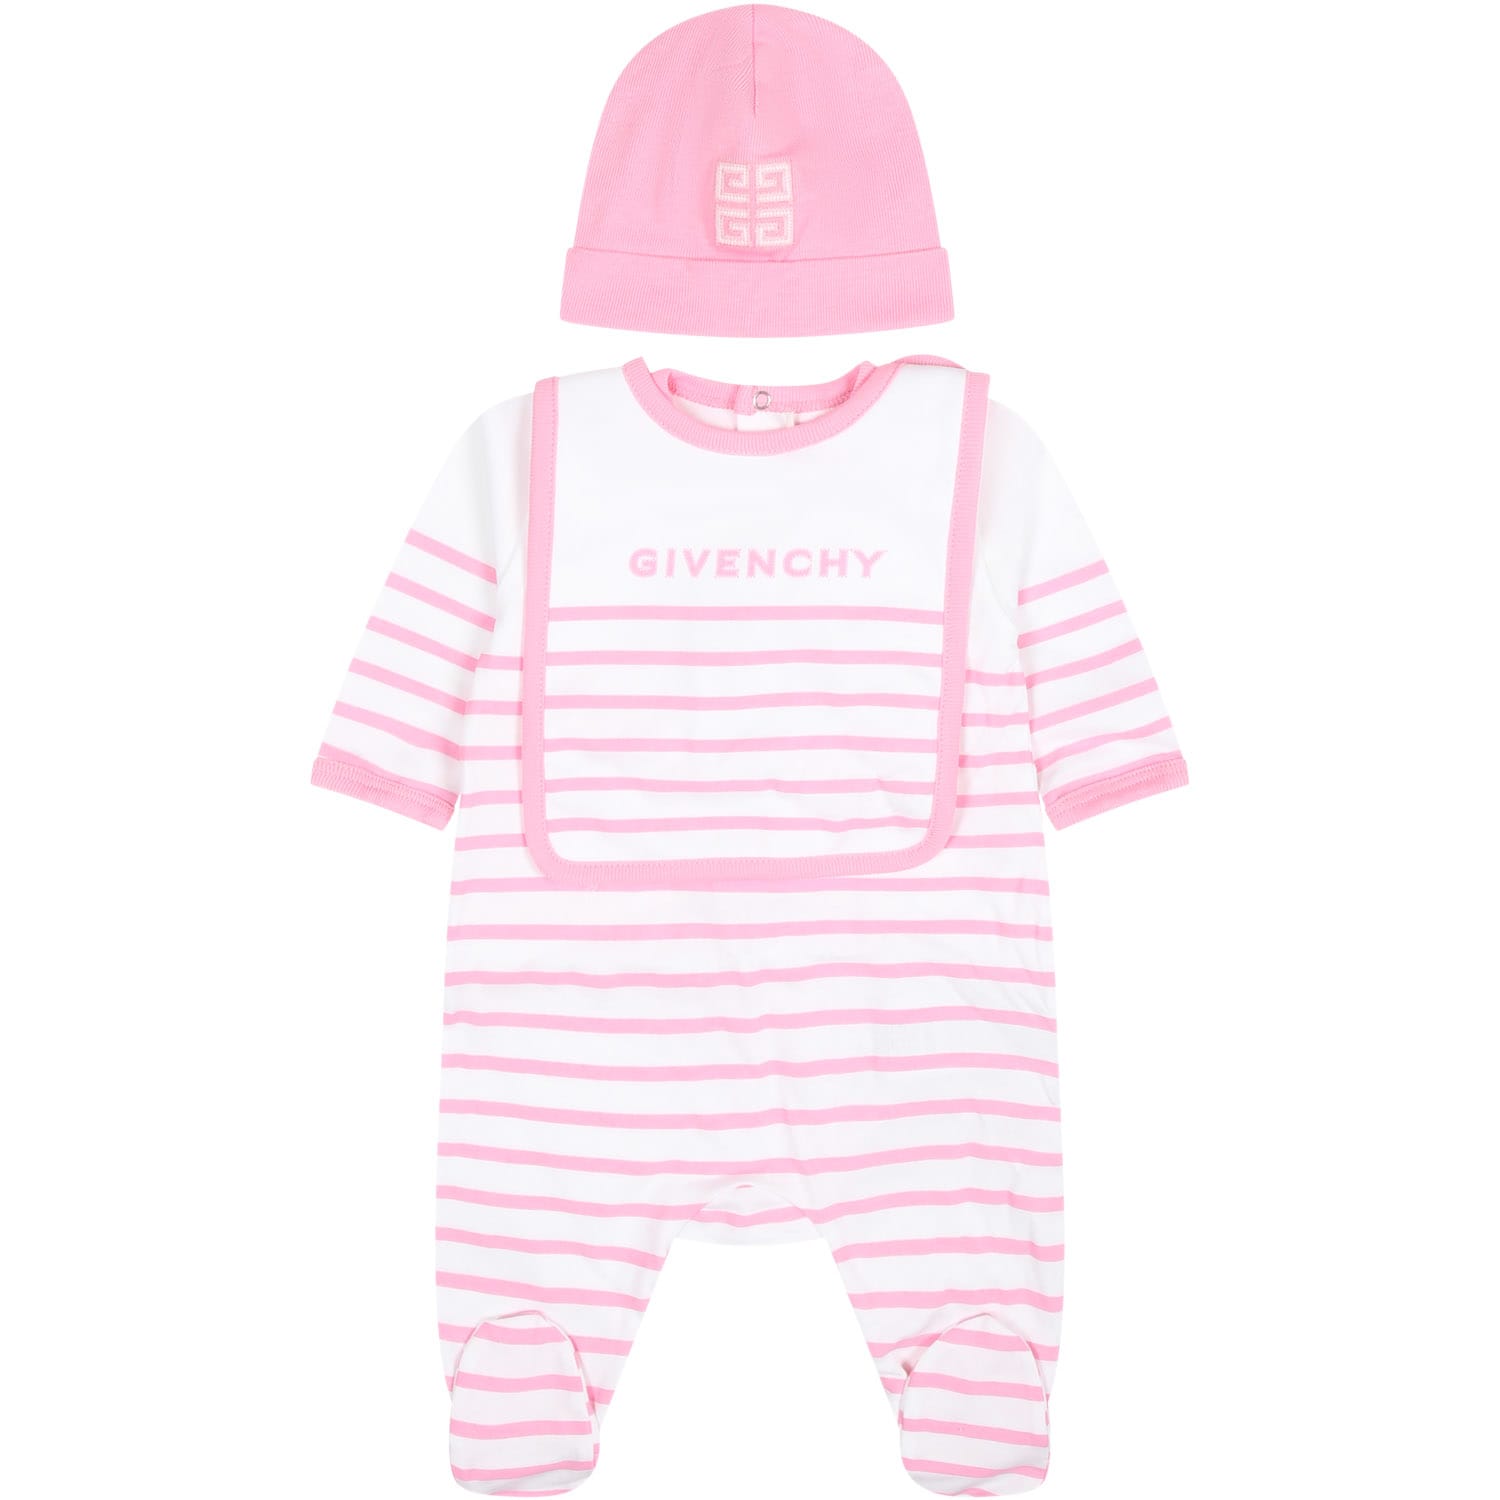 GIVENCHY PINK SET FOR BABY GIRL WITH LOGO STRIPES